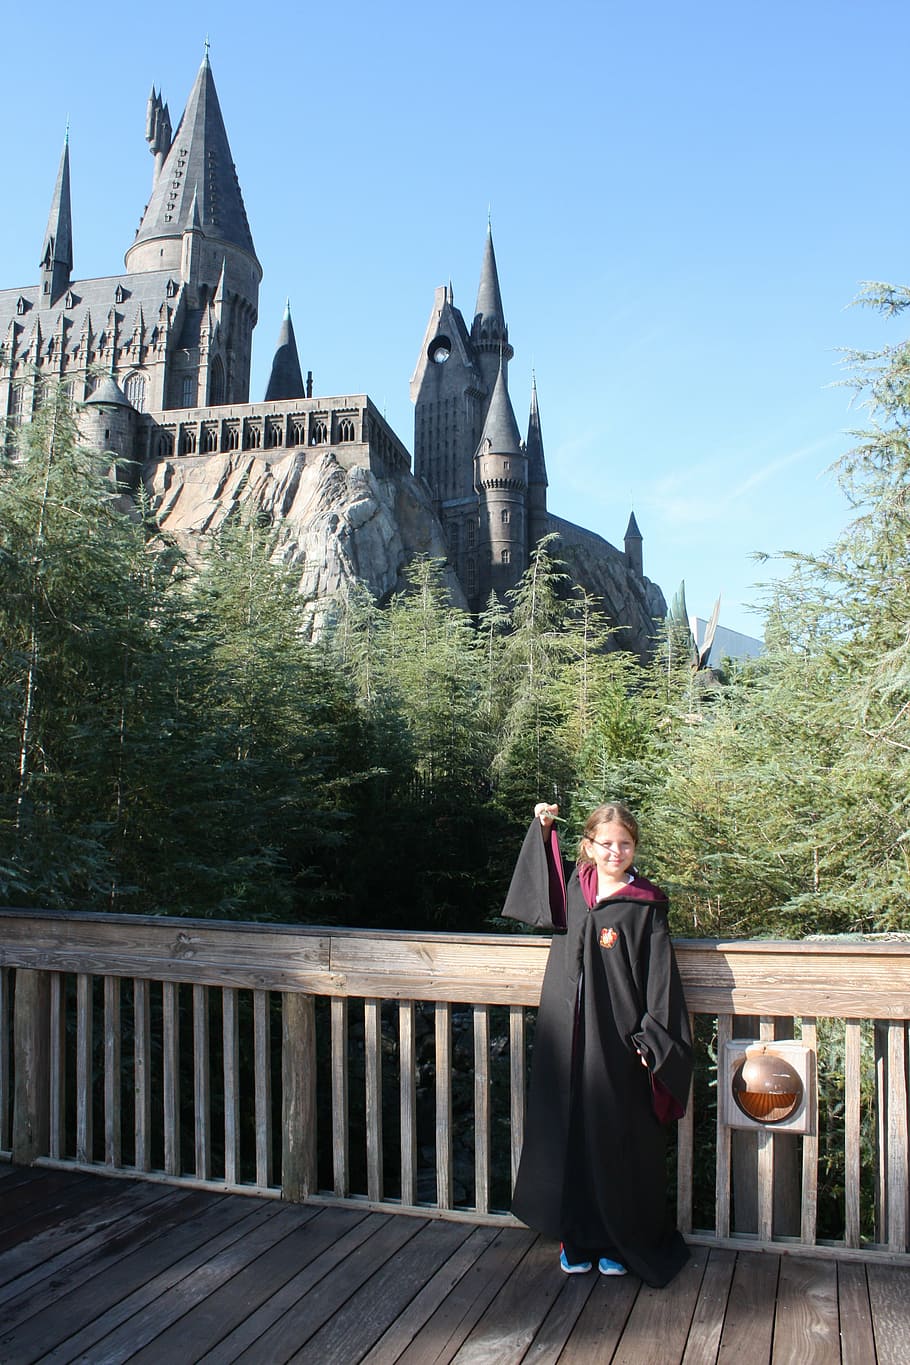 hogwarts, harry potter, universal, park, costume, girl, baby, real people, architecture, built structure